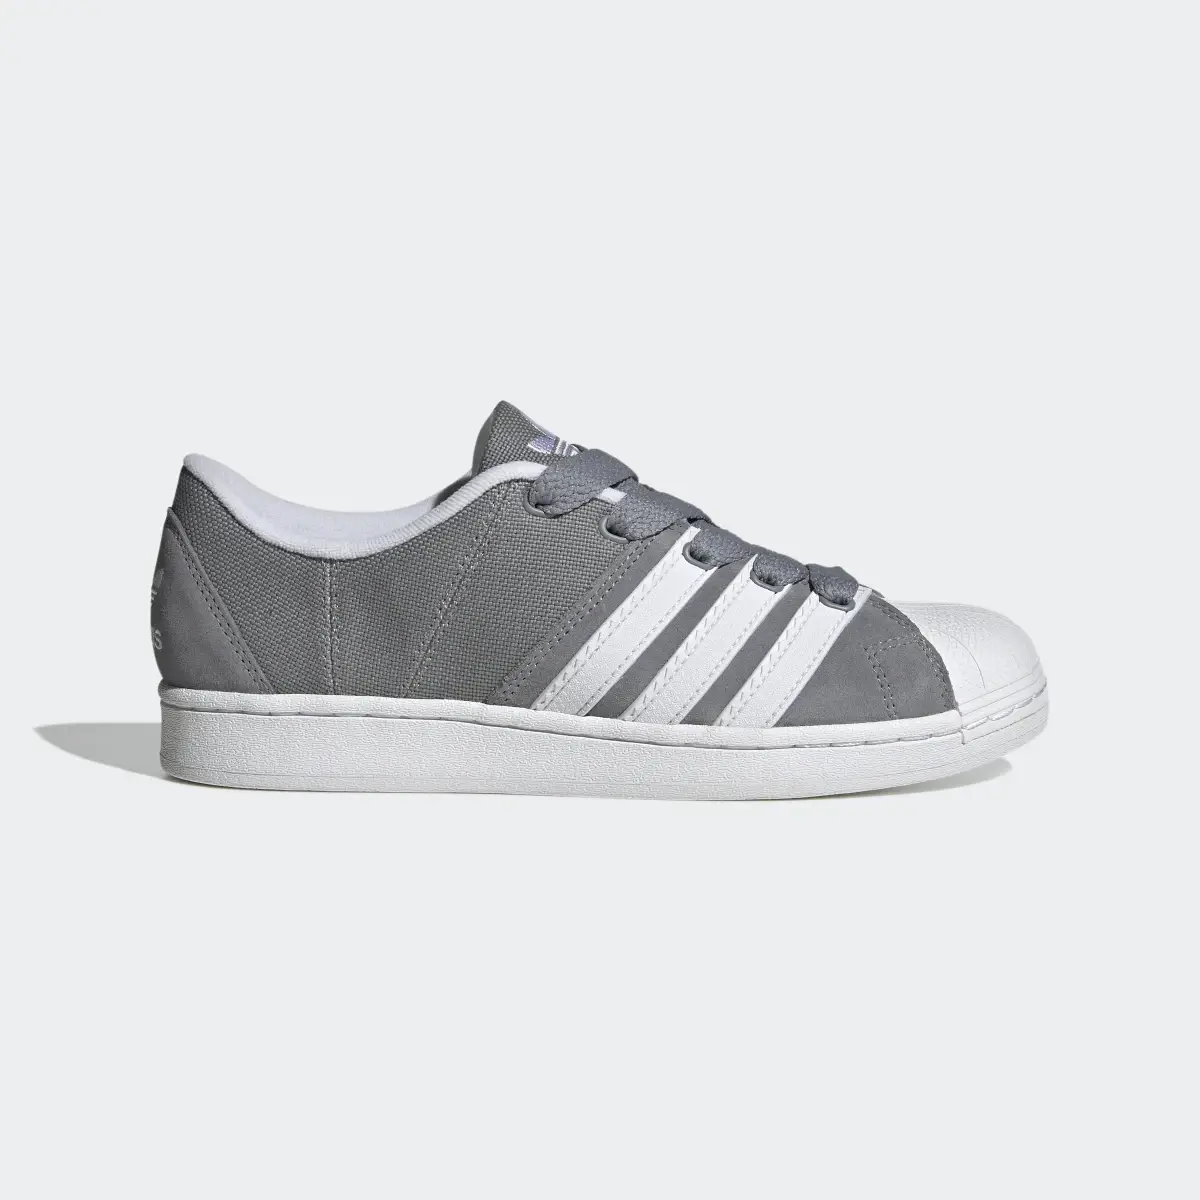 Adidas Superstar Supermodified Shoes. 2